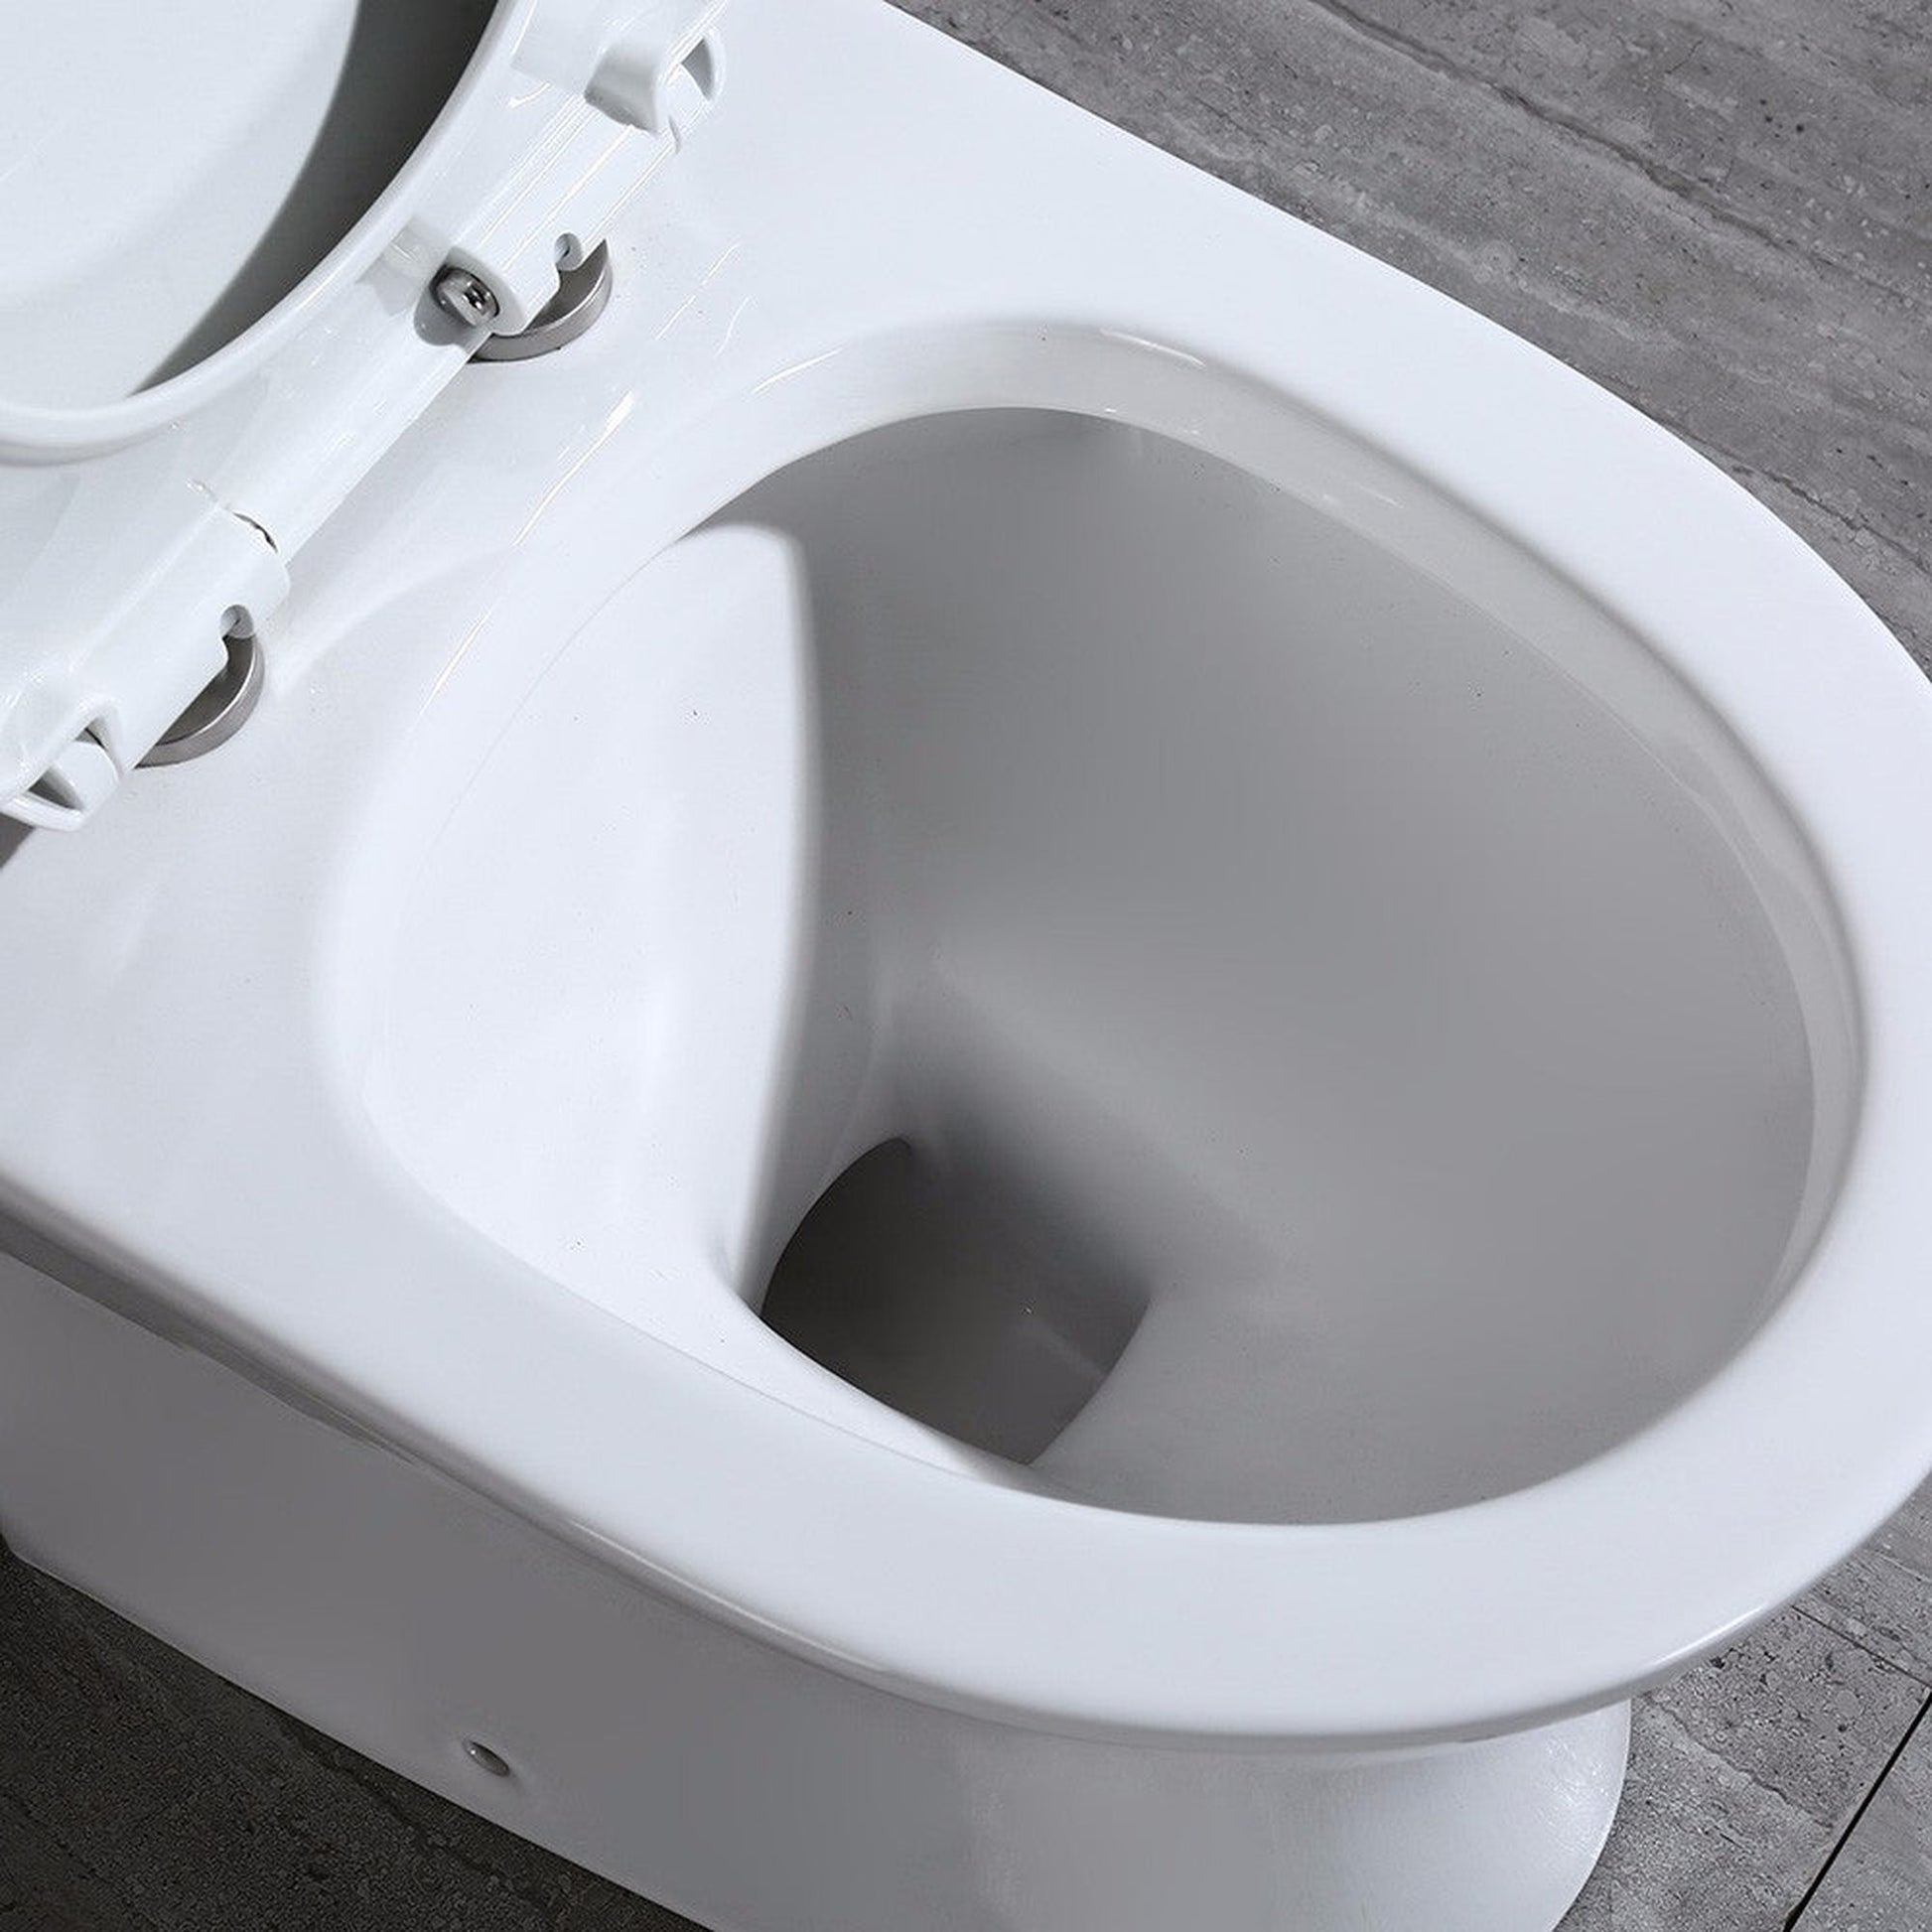 WoodBridge T0031-CH White Short Compact Tiny One Piece Toilet With Soft Closing Seat and Chrome Finish Button